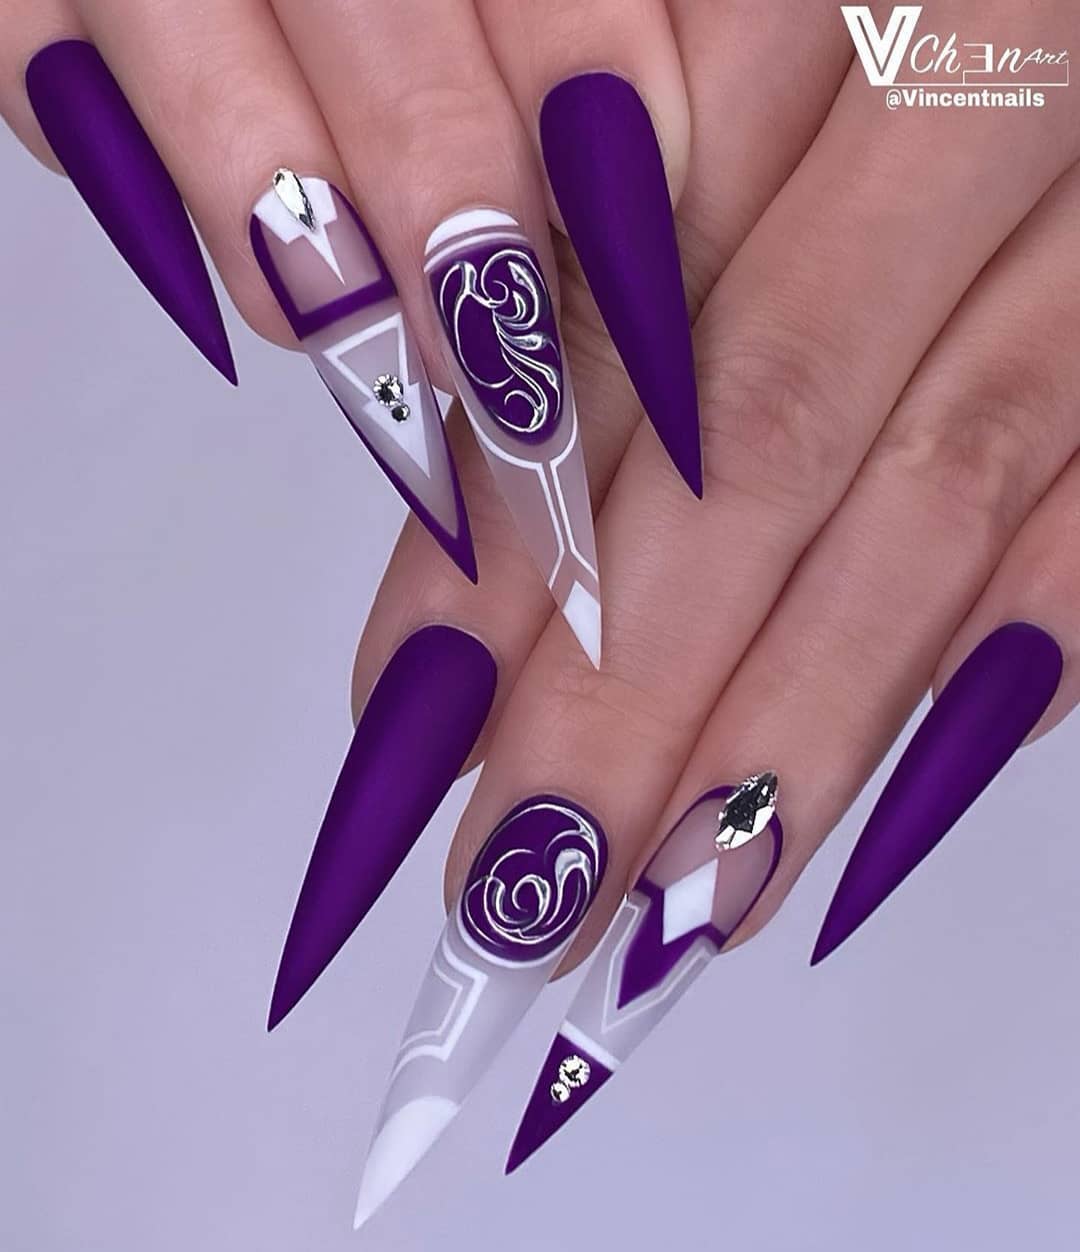 50 Best Nail Designs Trends To Try Out In 2022 images 22